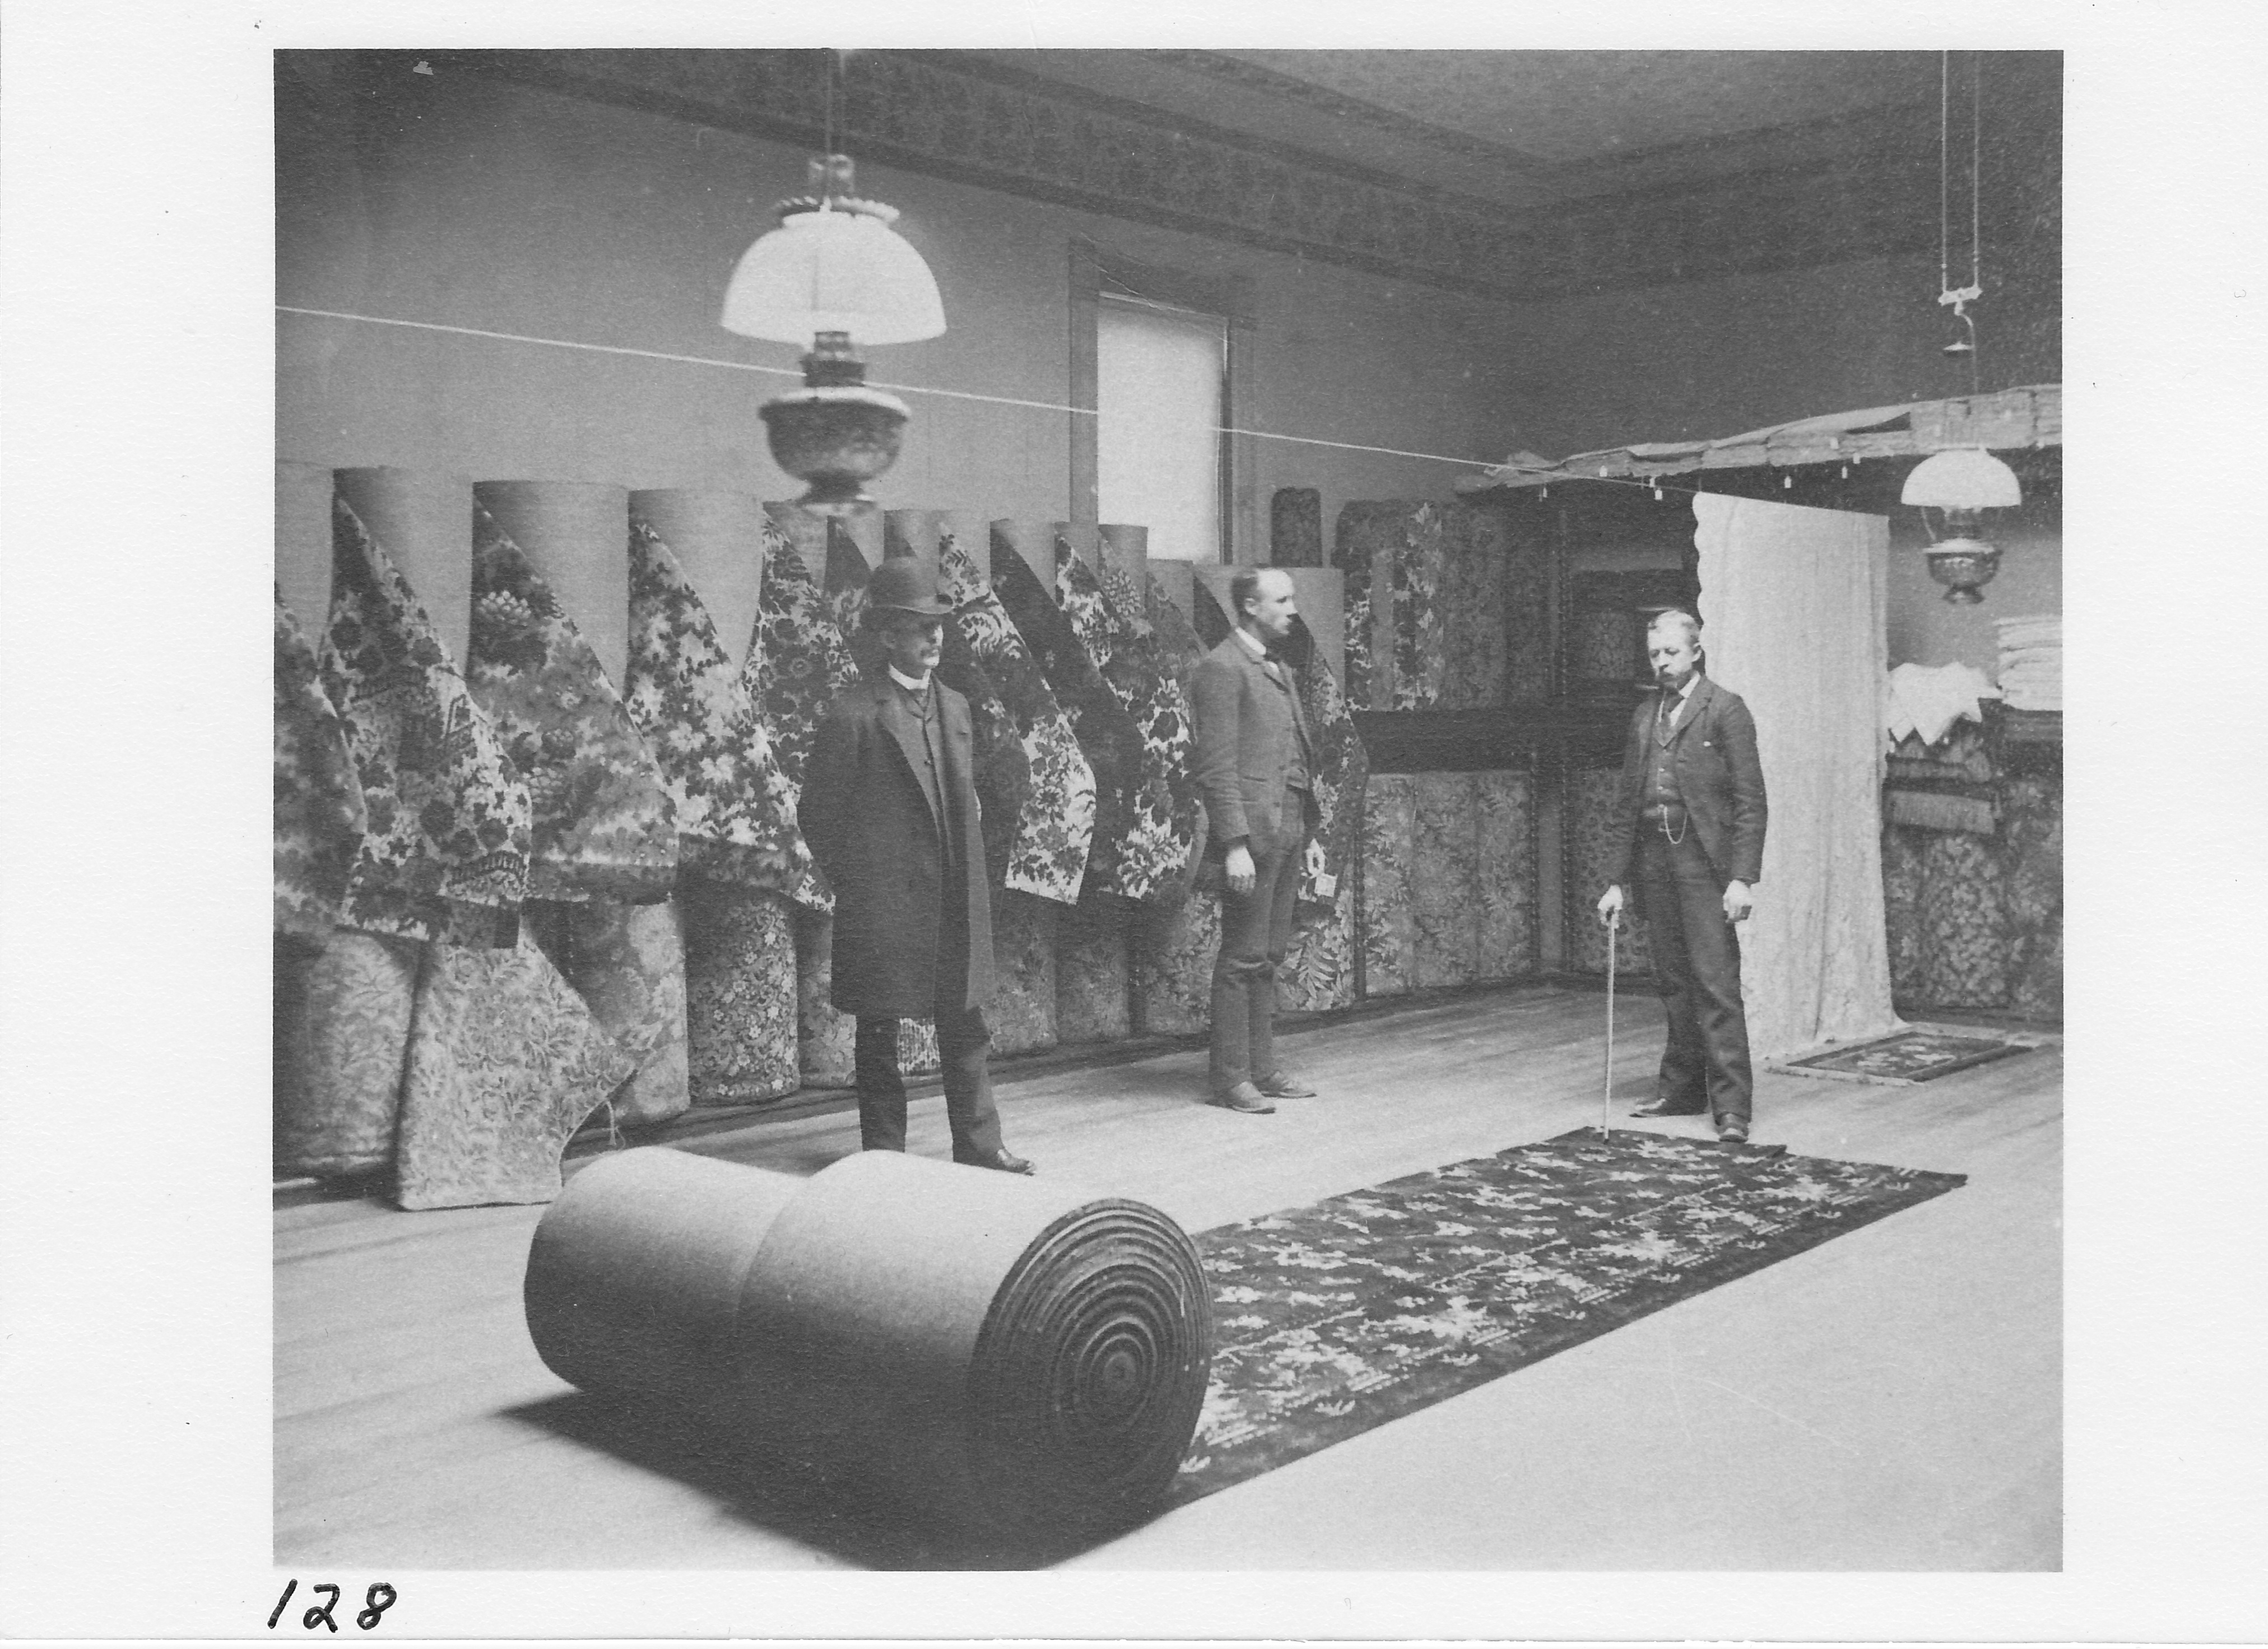 The carpet room in W. W. Crabbs Store.